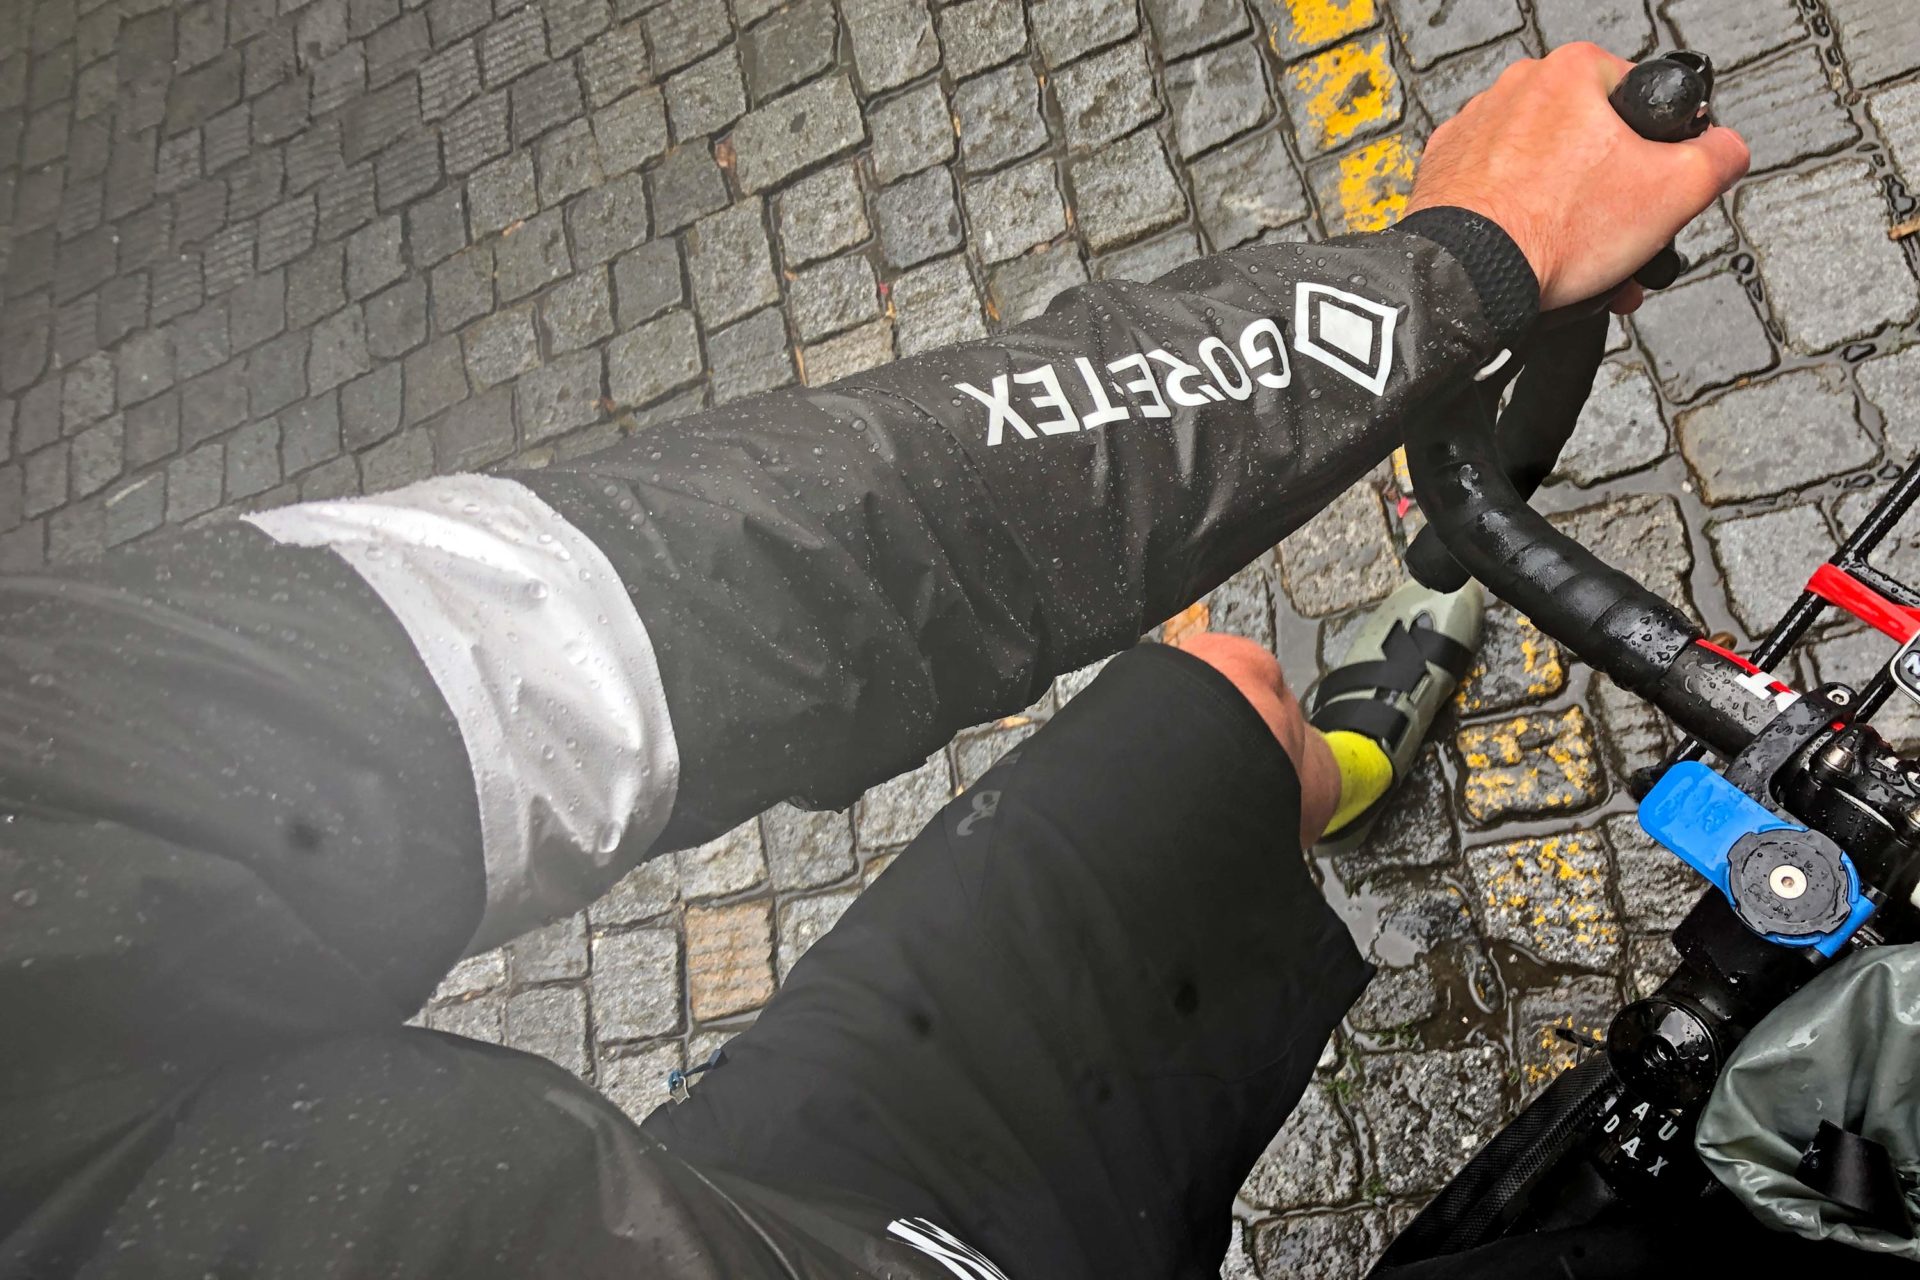 Review Rapha Pro Team Insulated GoreTex jacket keeps dry & warm when it's cold & wet! Bikerumor